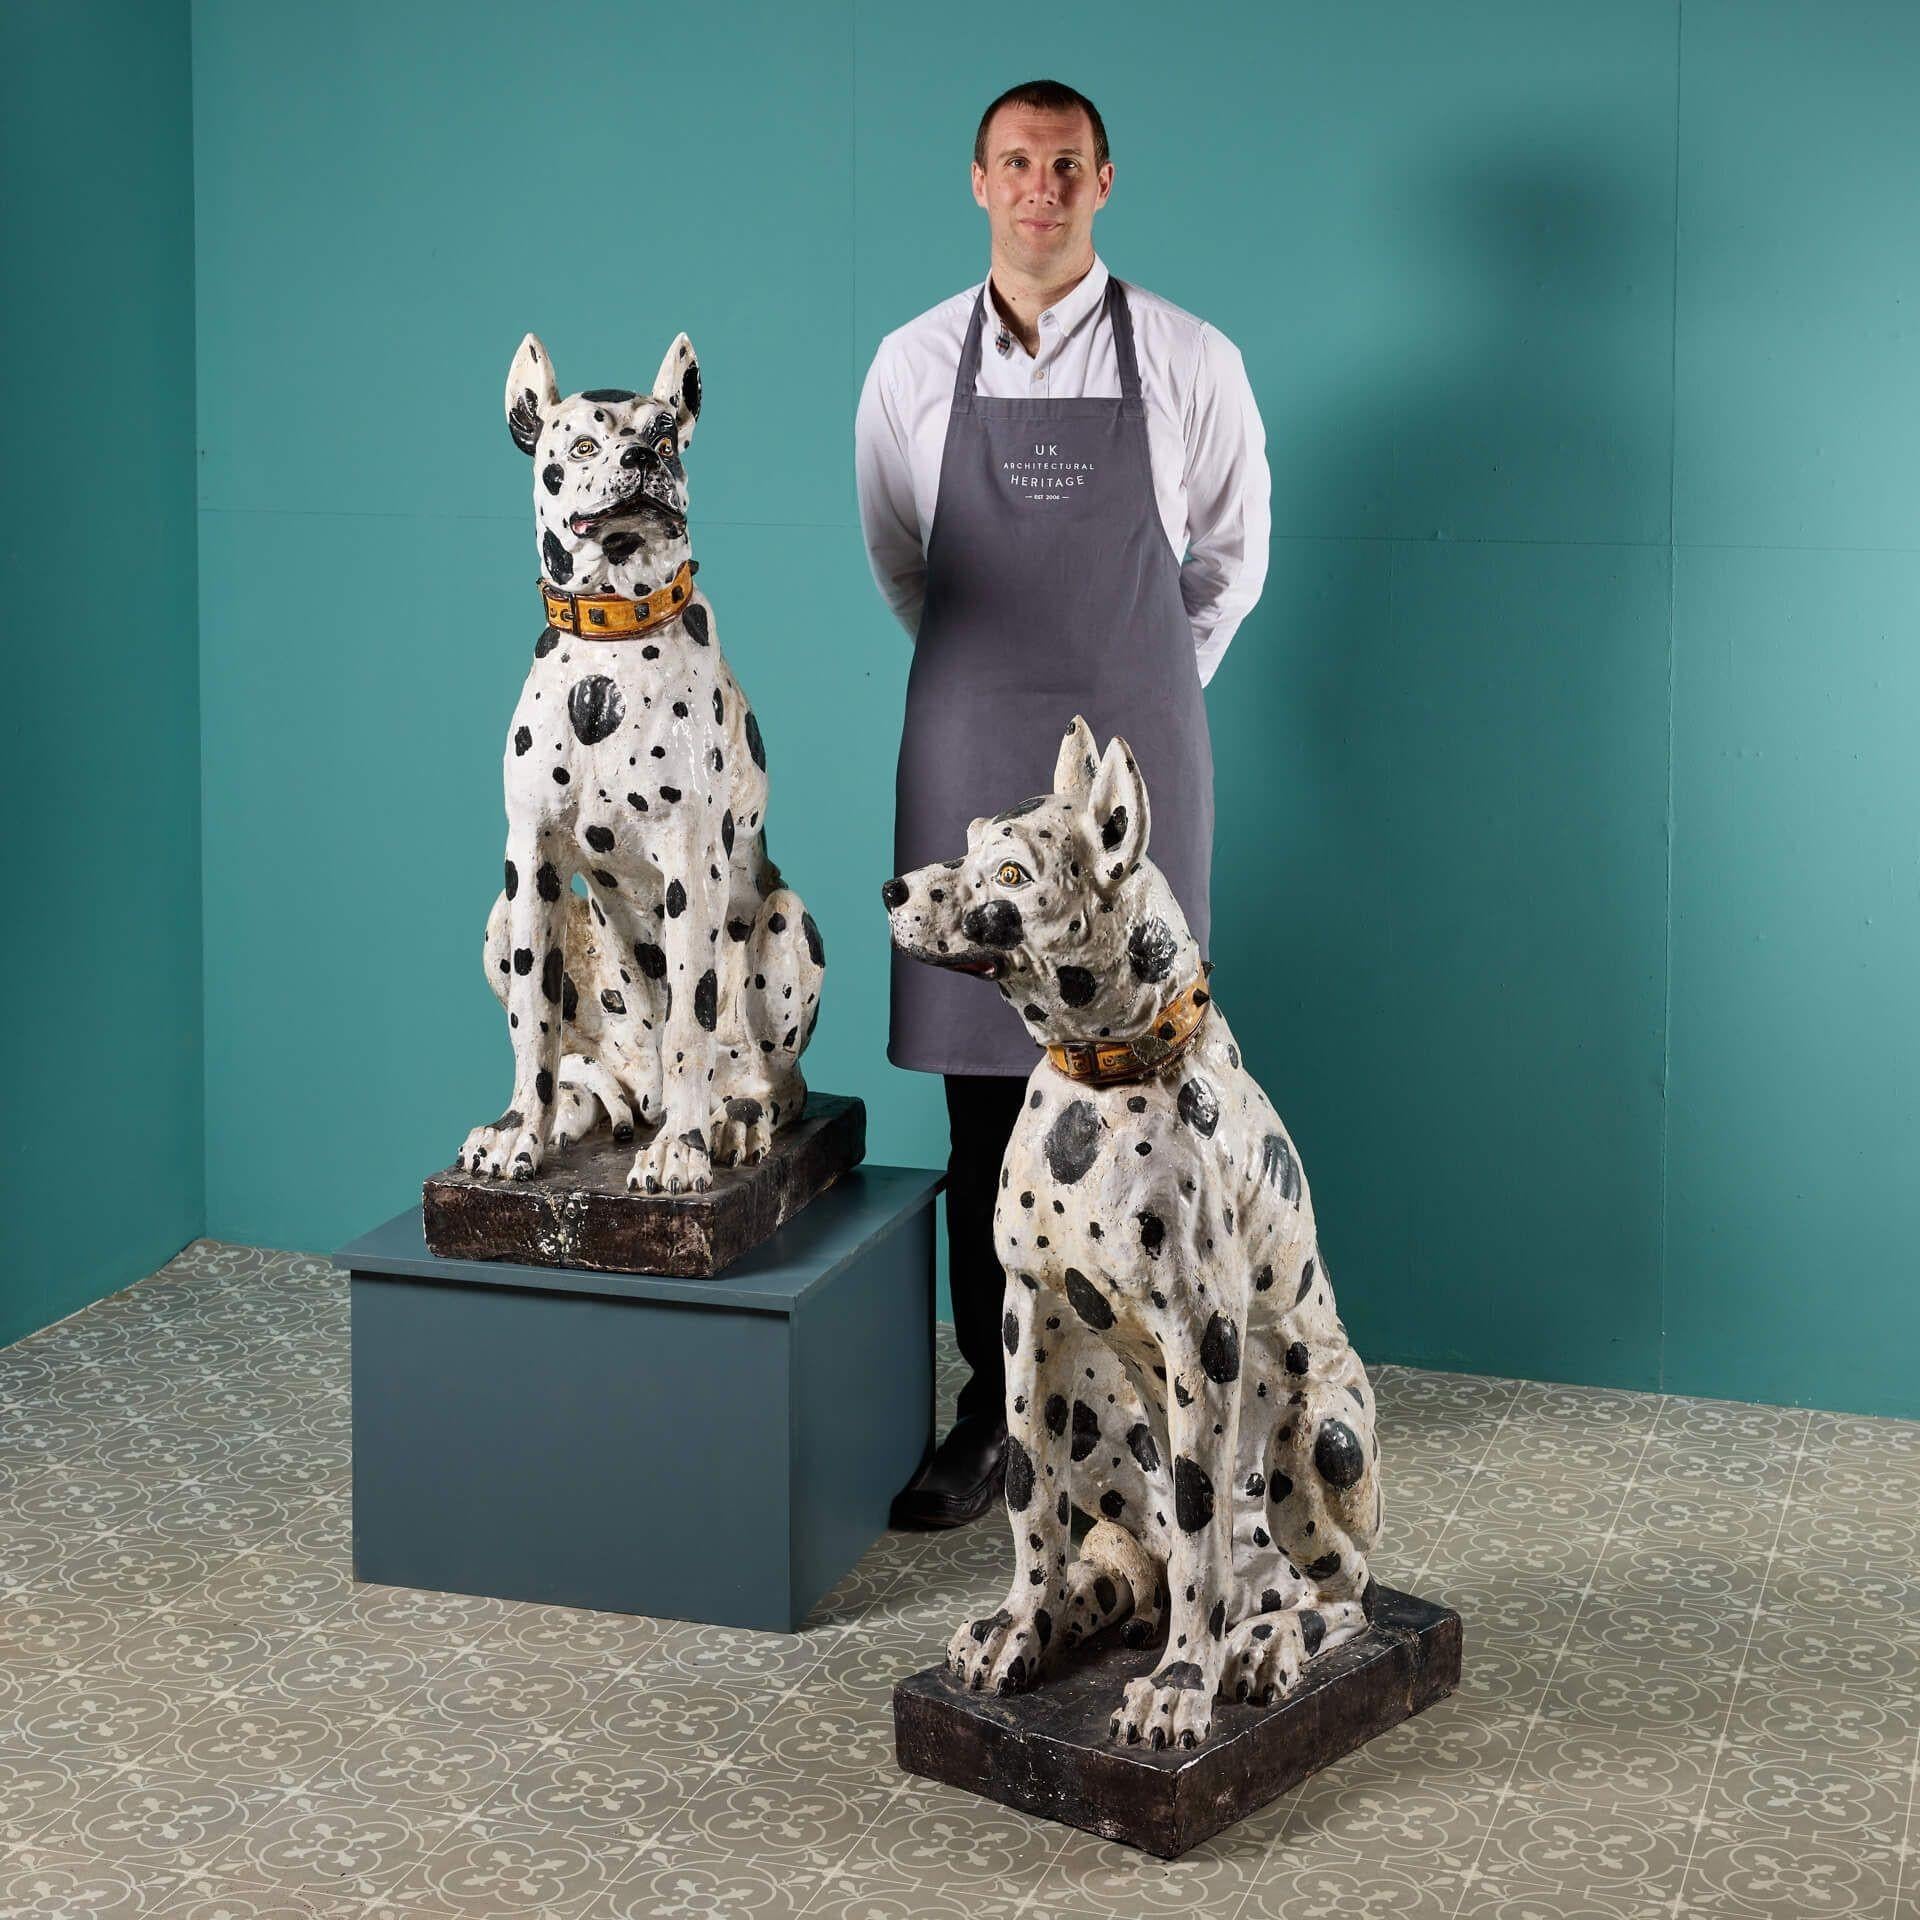 A playful pair of reclaimed mid 20th century life-size Great Dane statues made in terracotta and glazed in white with black spots. Handsomely made, these dogs are superbly designed in realistic detail with dynamic profiles, pointed ears and lively